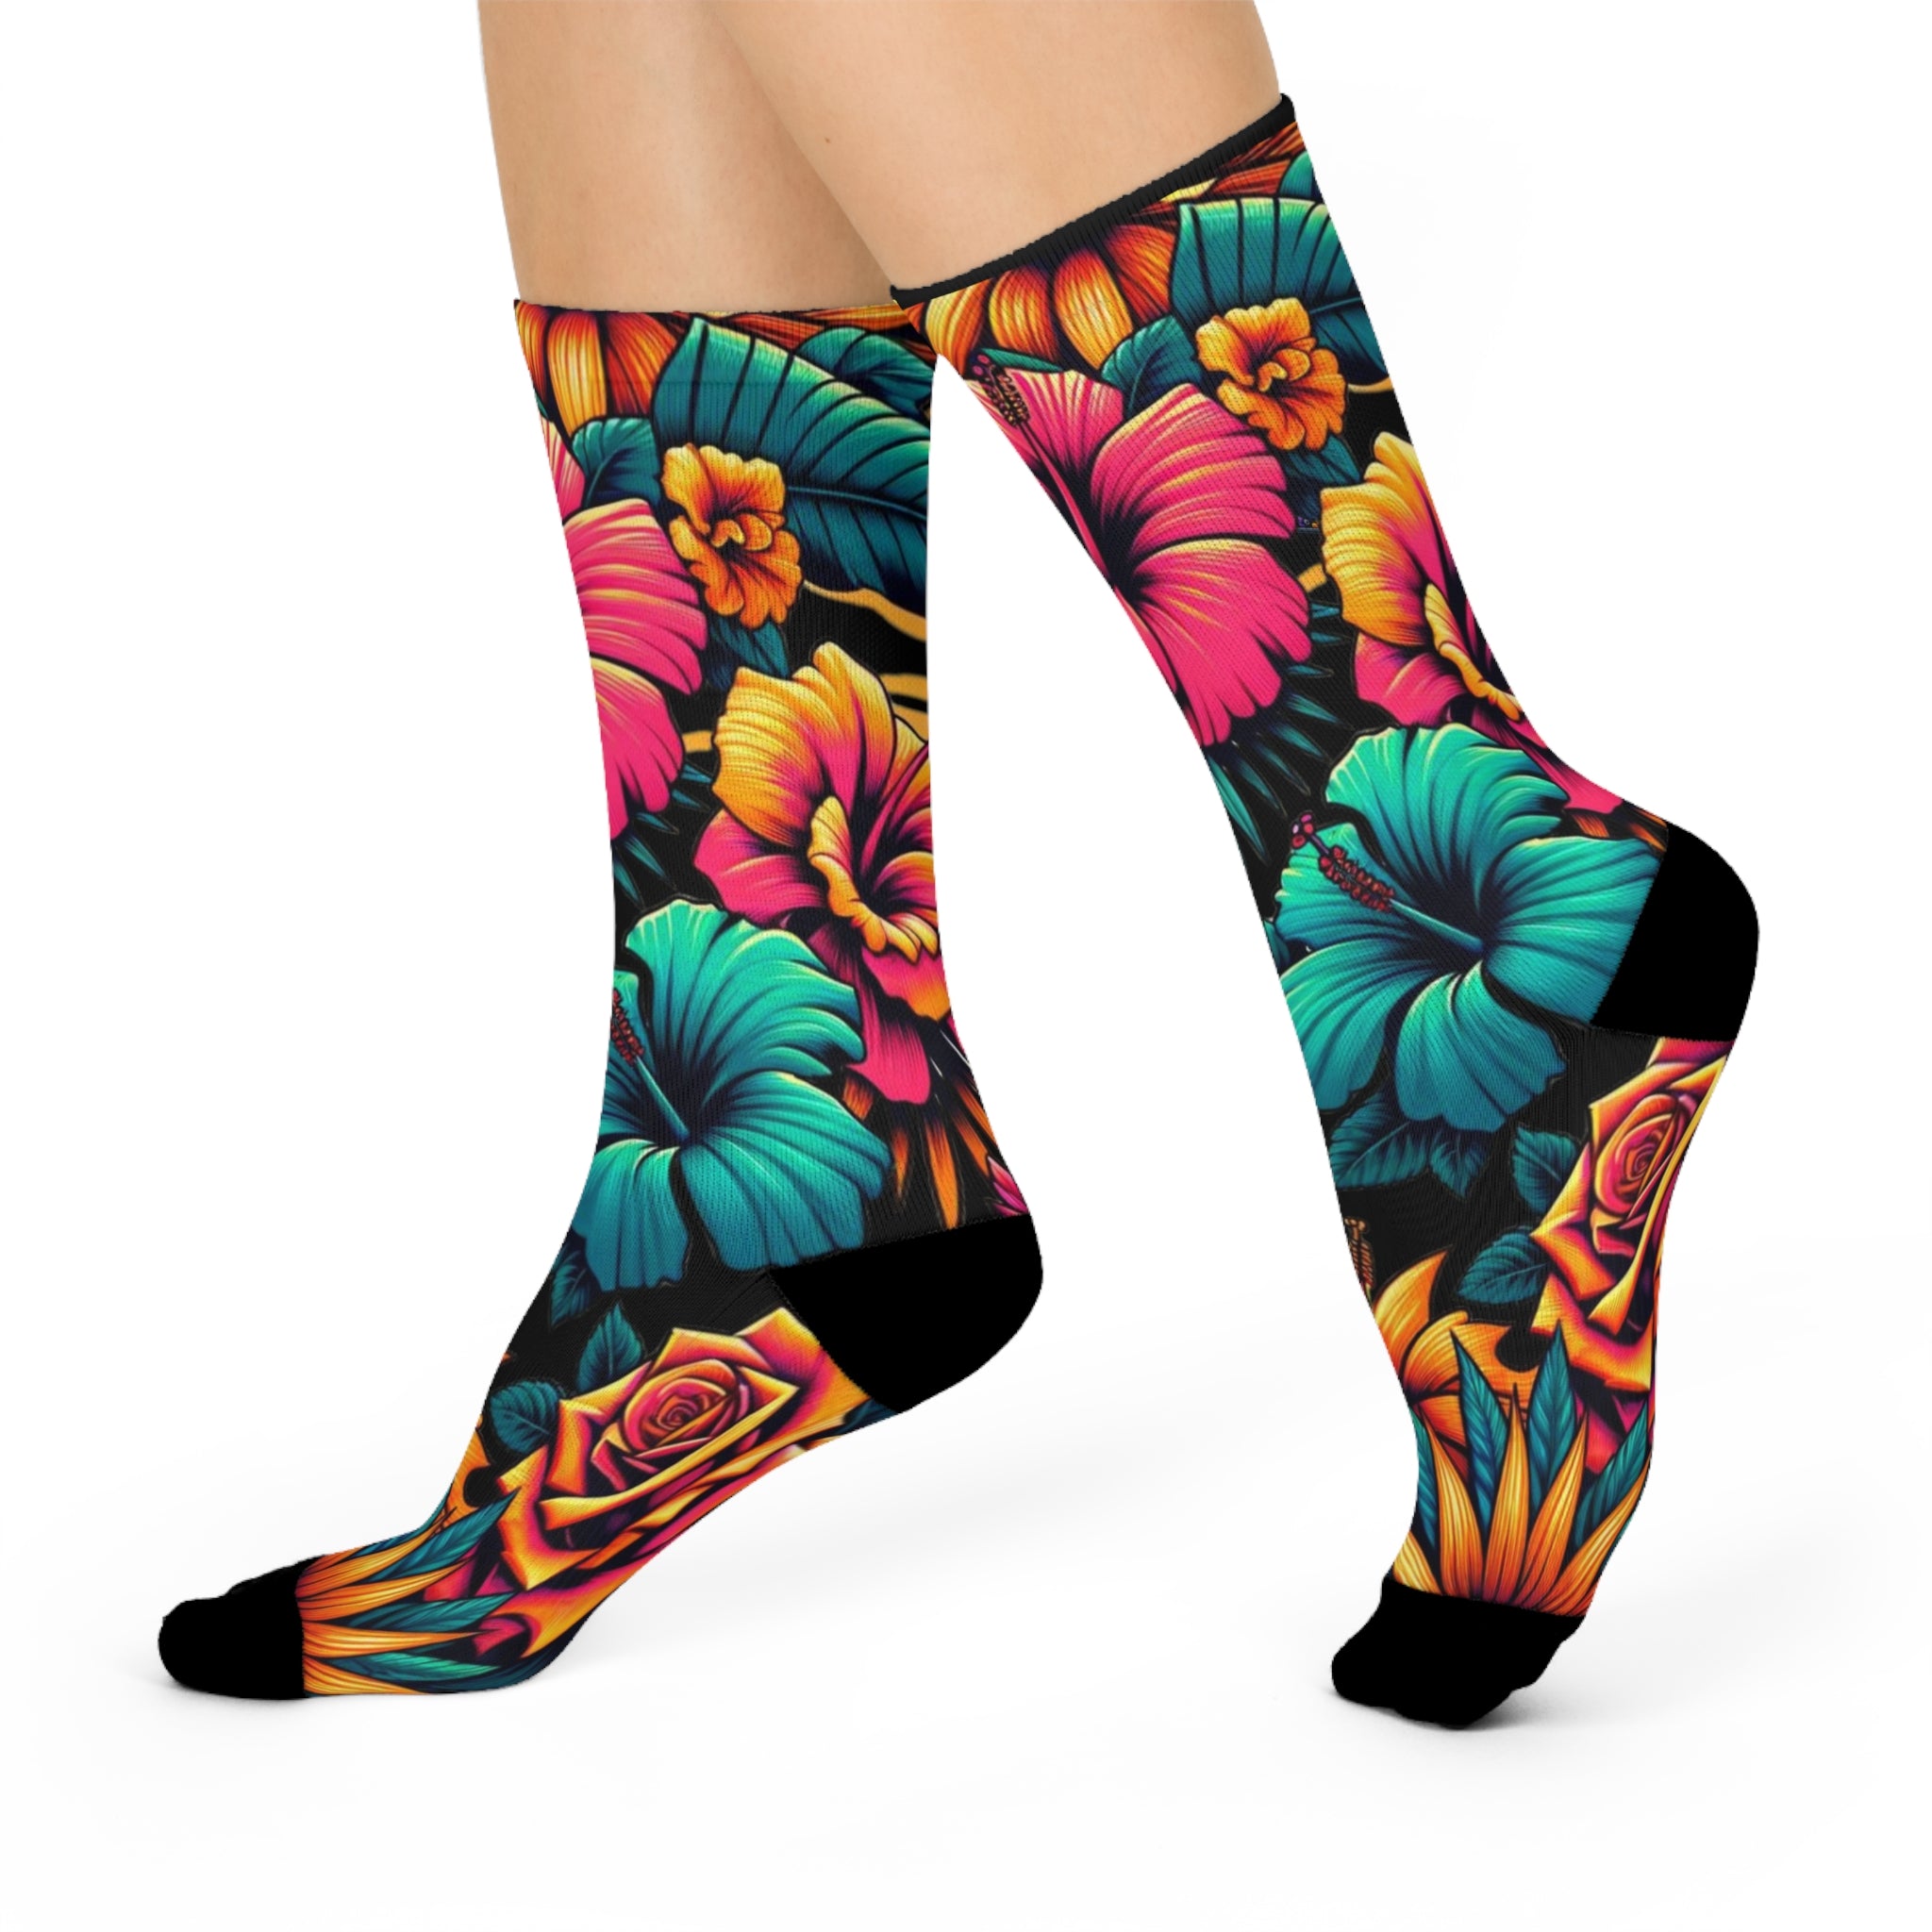 a pair of colorful socks with flowers on them